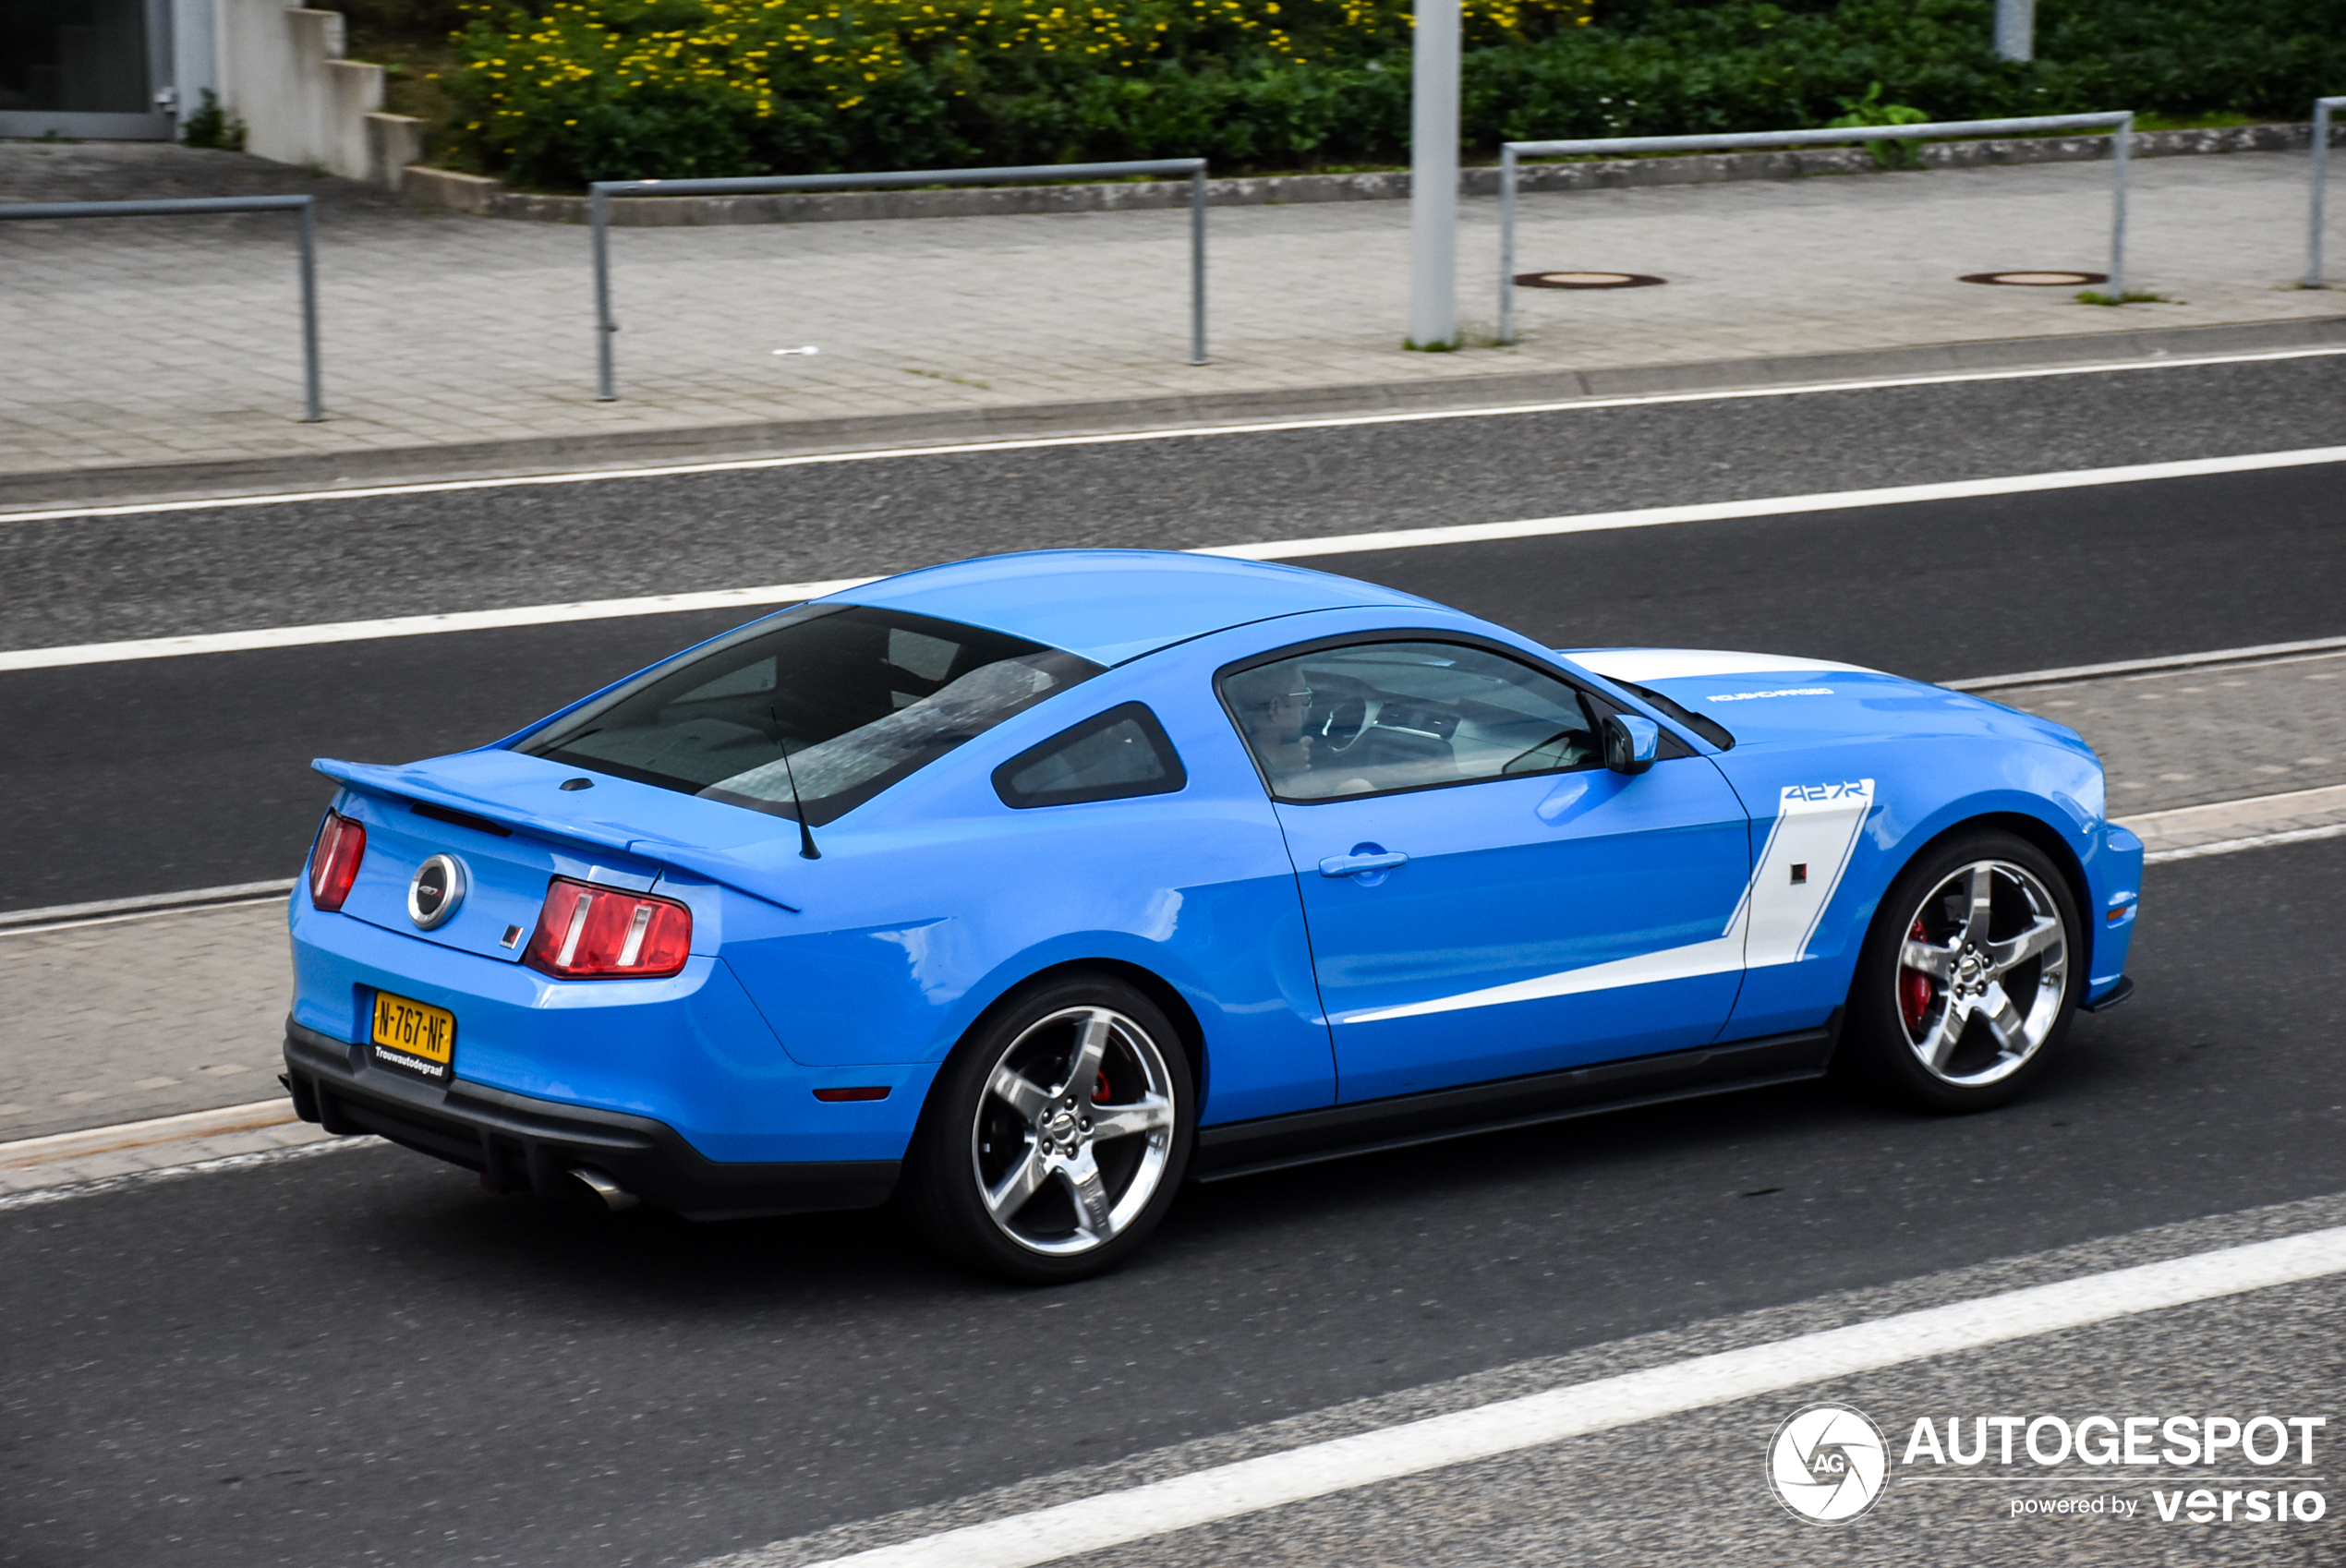 Ford Mustang Roush 427R 2011